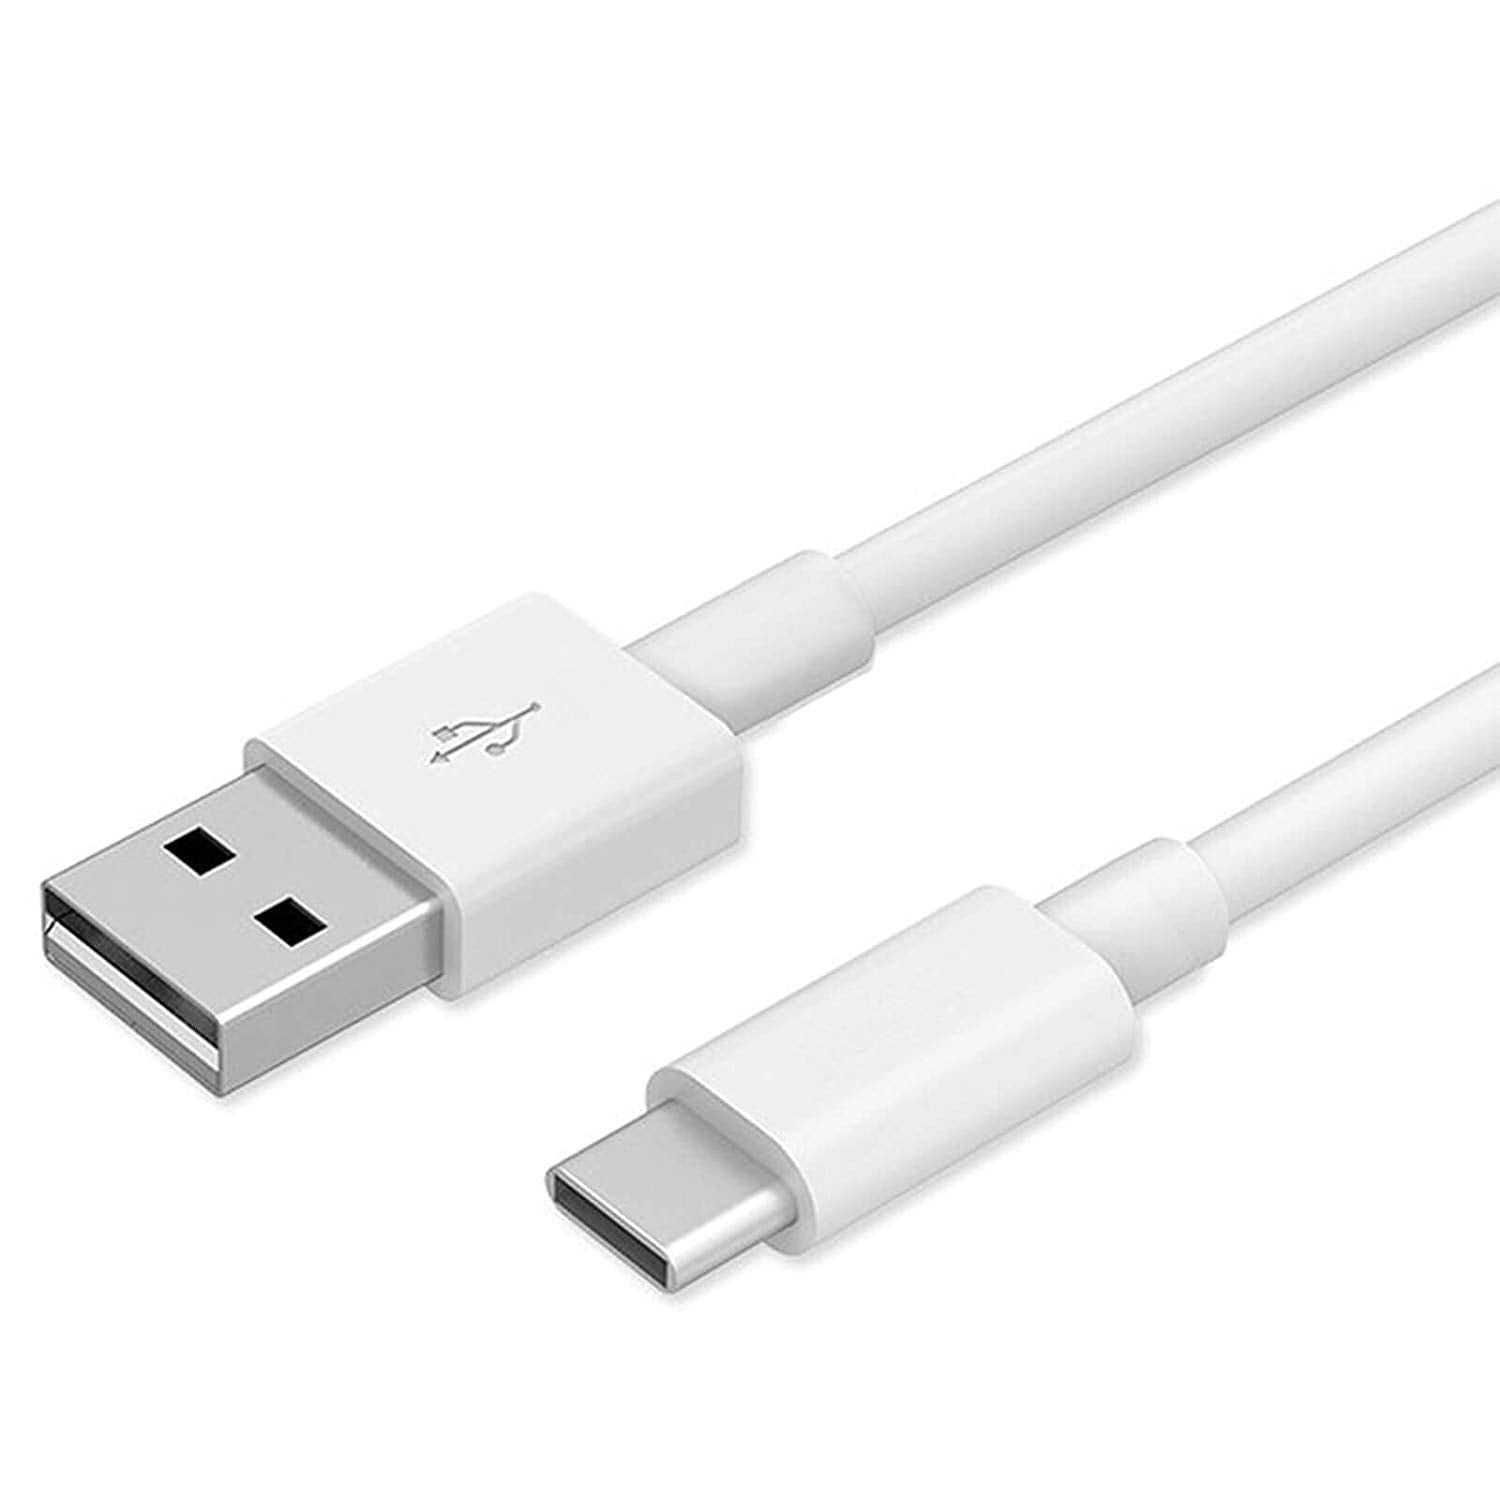 Samsung Galaxy S20 USB to Type C Charging Cable In Car White - 25 CM Short - SmartPhoneGadgetUK